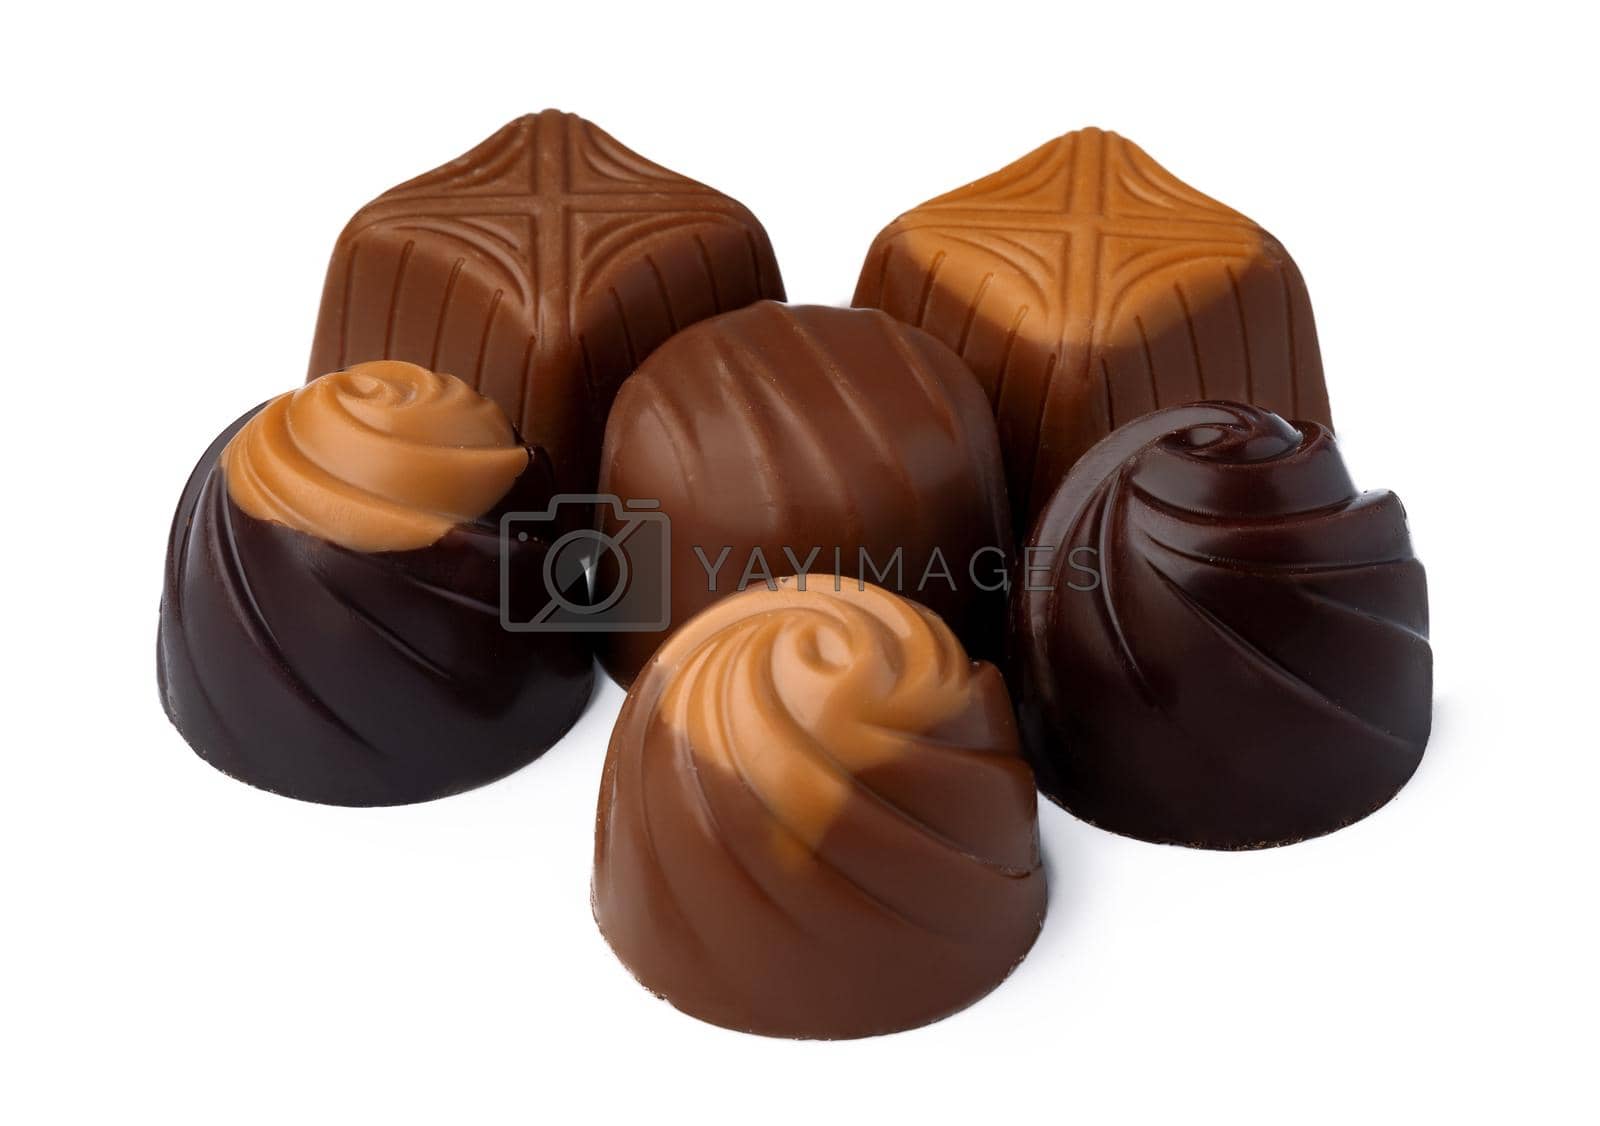 Royalty free image of Chocolate candies sweets isolated on a white background by Fabrikasimf